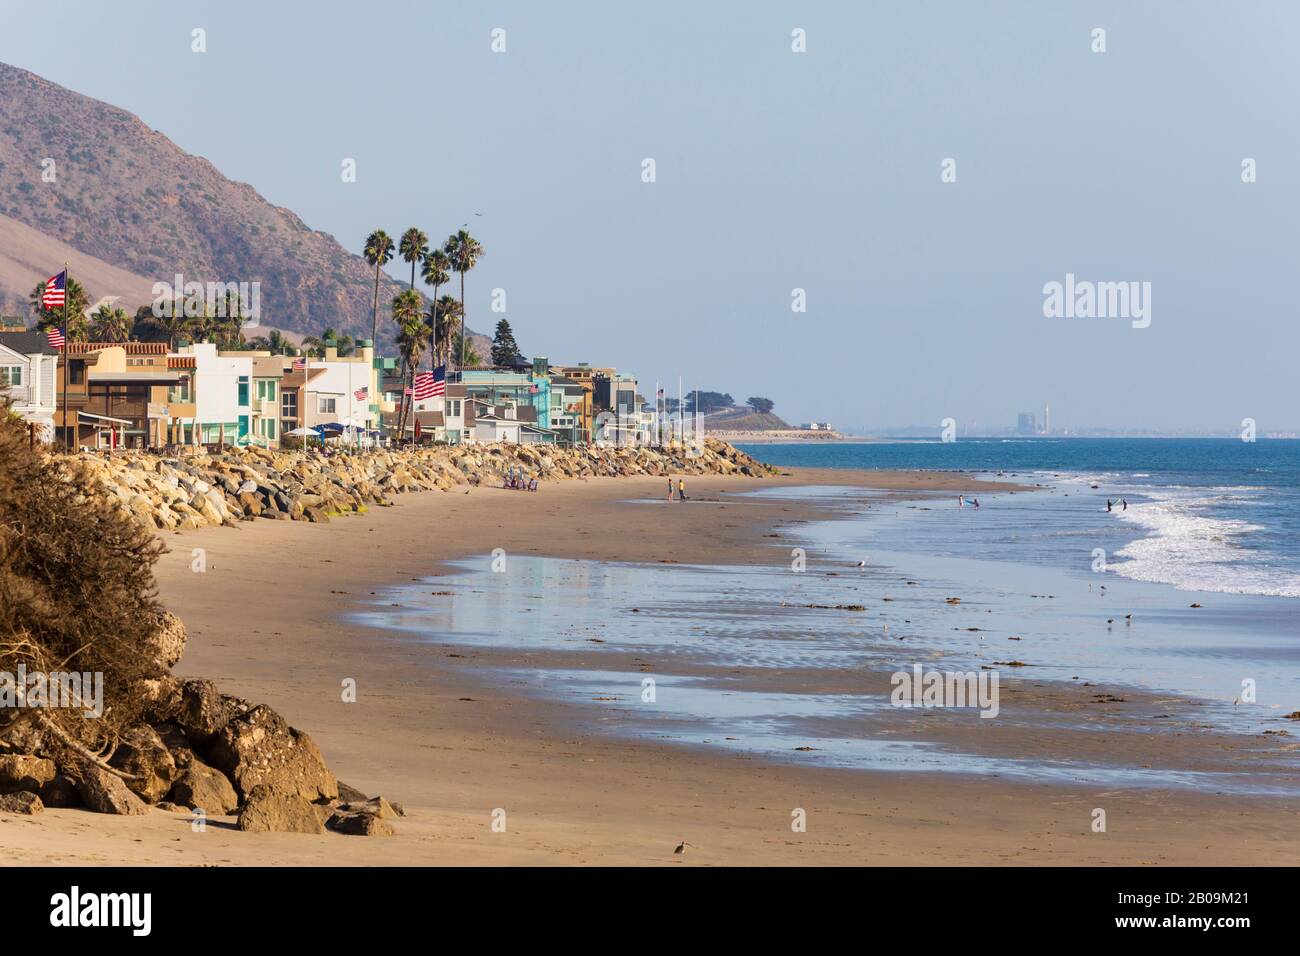 Solimar beach on the Pacific coast highway, California, United States of America Stock Photo